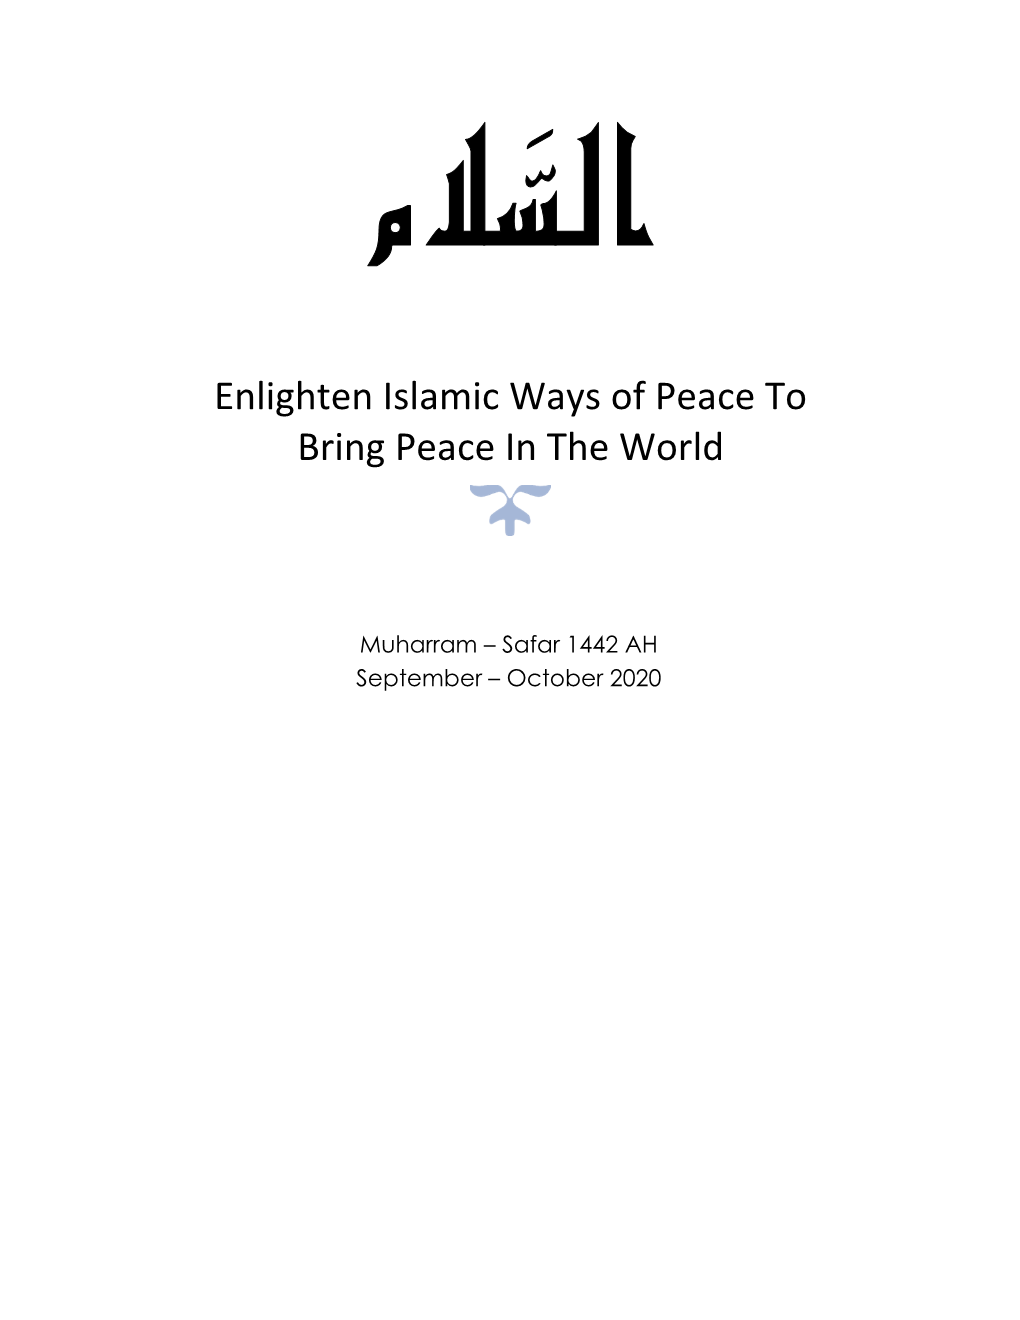 Ways of Peace to Bring Peace in the World